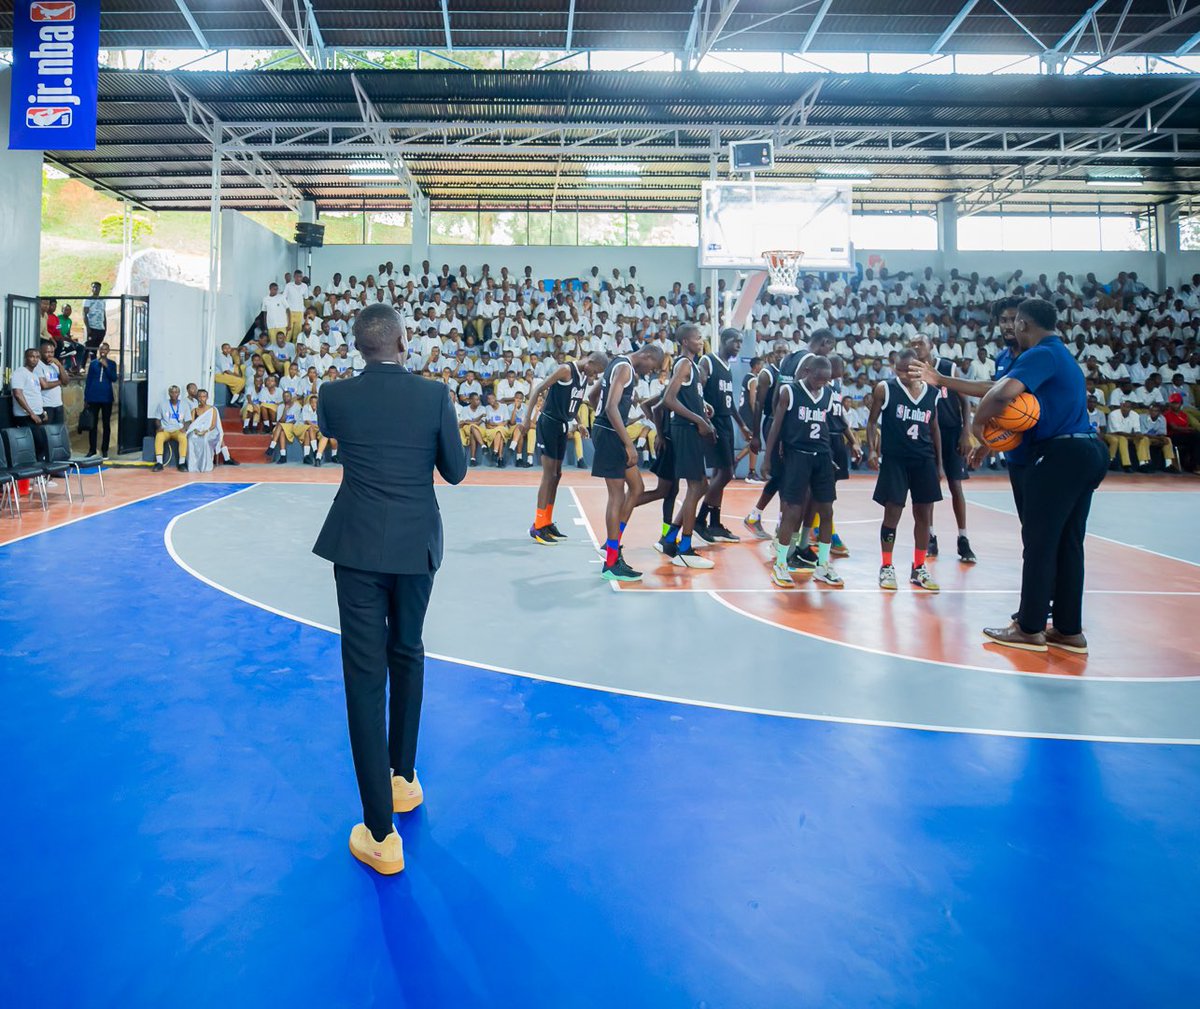 What a great pleasure & honor to have been the Host/MC during the Unveiling of the 1500-seat Court @ldkgymnasium  with @NBA_Africa & @ferwabaRW
Chasing my Dreams🥰✊🏽TO GOD ALWAYS BE THE GLORY 🙌🏽
📸 @yuhi_the_great 

#MCBR1AN🇷🇼 #NBA #NBAAfrica #Basketball #PAAnnouncer @OverTheMic